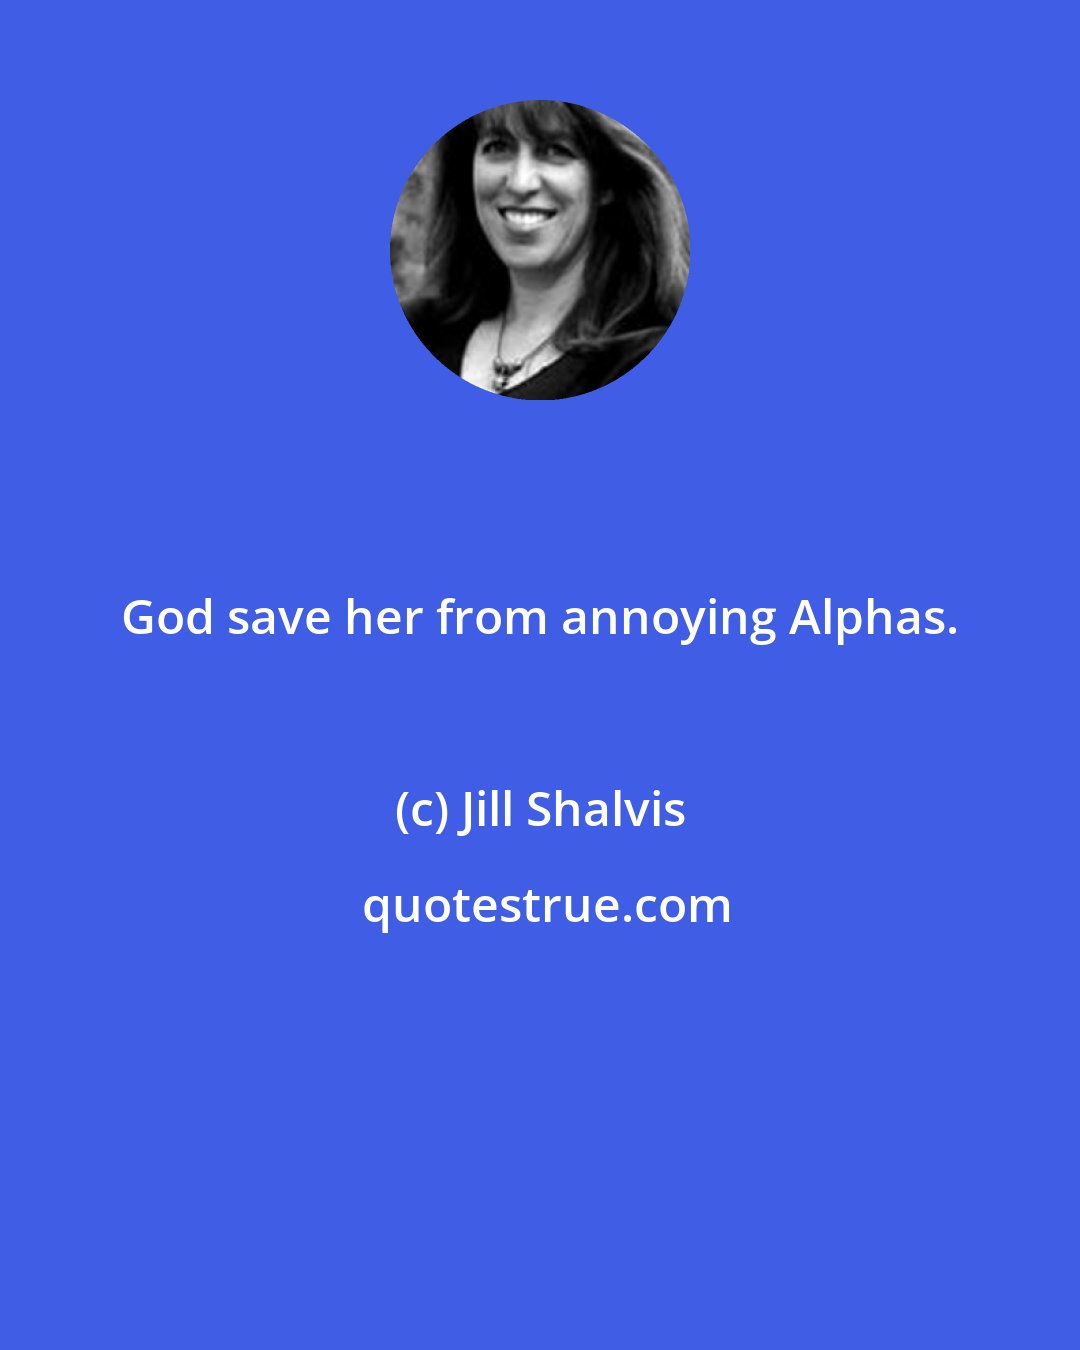 Jill Shalvis: God save her from annoying Alphas.